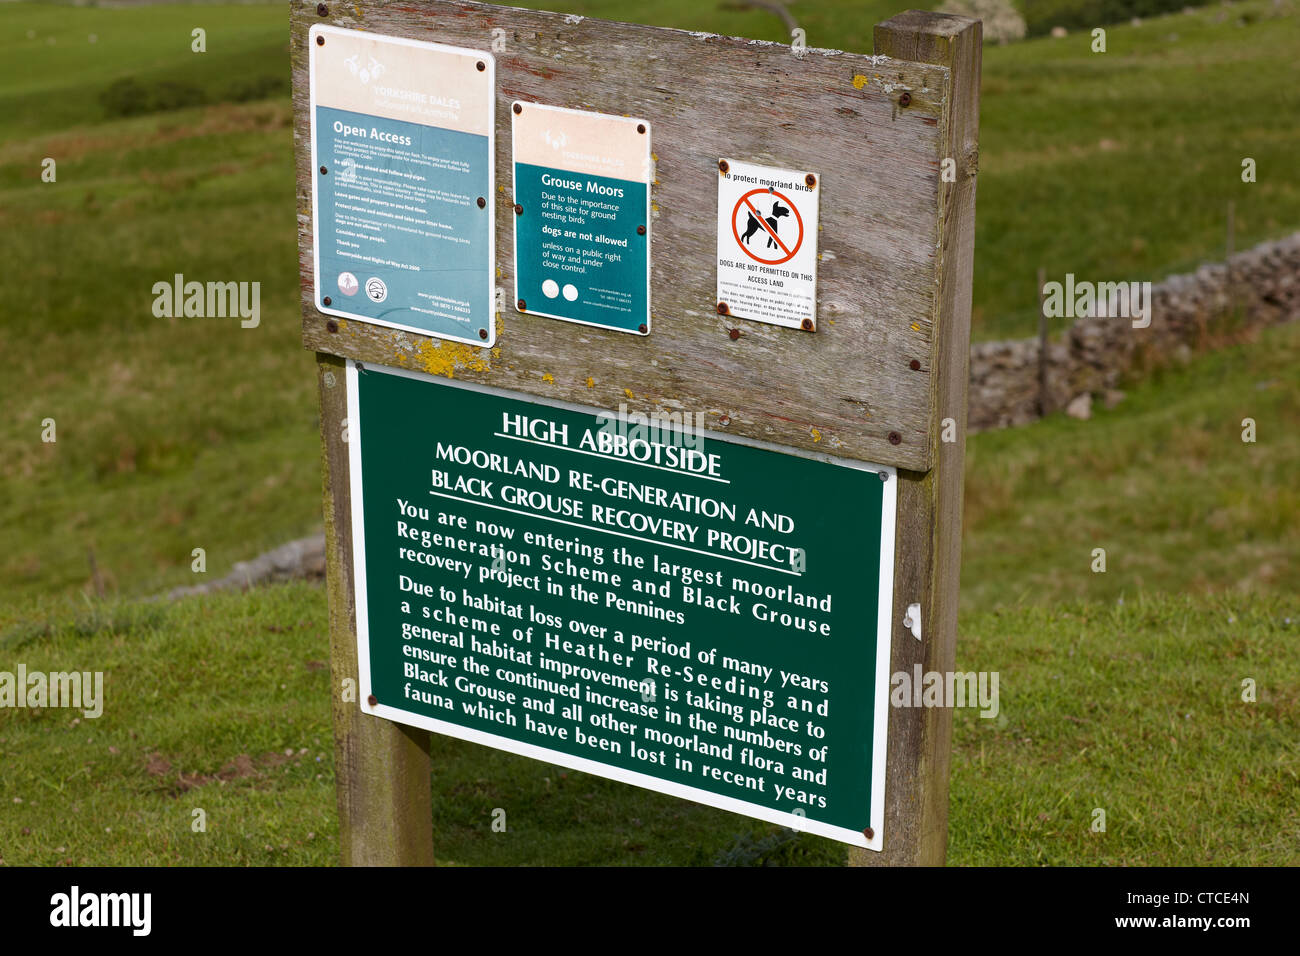 High Abbotside Moorland Regeneration and Black Grouse Recovery Project. Information sign on moorland in Yorkshire Dales UK Stock Photo